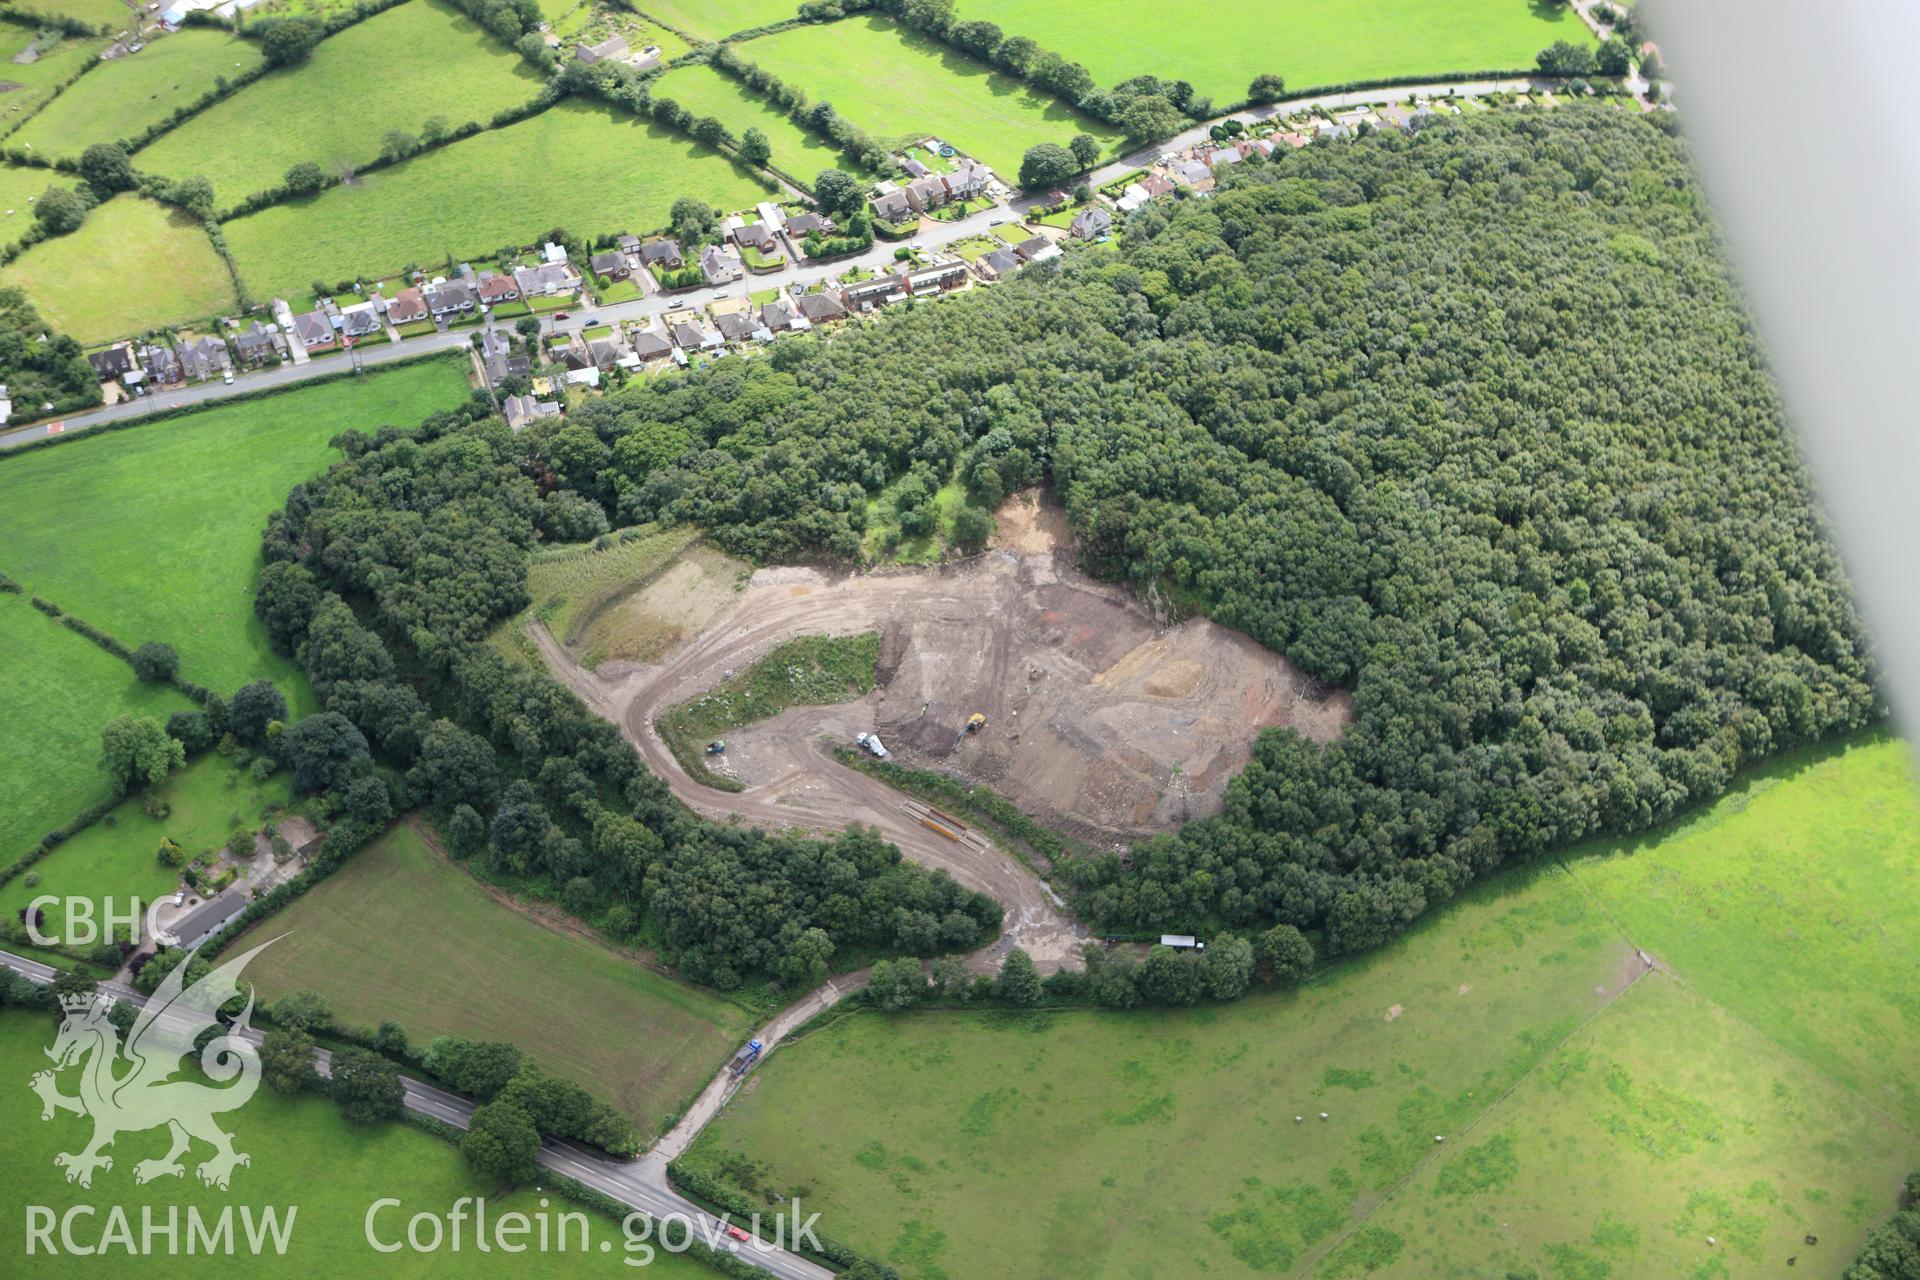 RCAHMW colour oblique aerial photograph of Caer Estyn Hill Fort. Taken on 30 July 2009 by Toby Driver